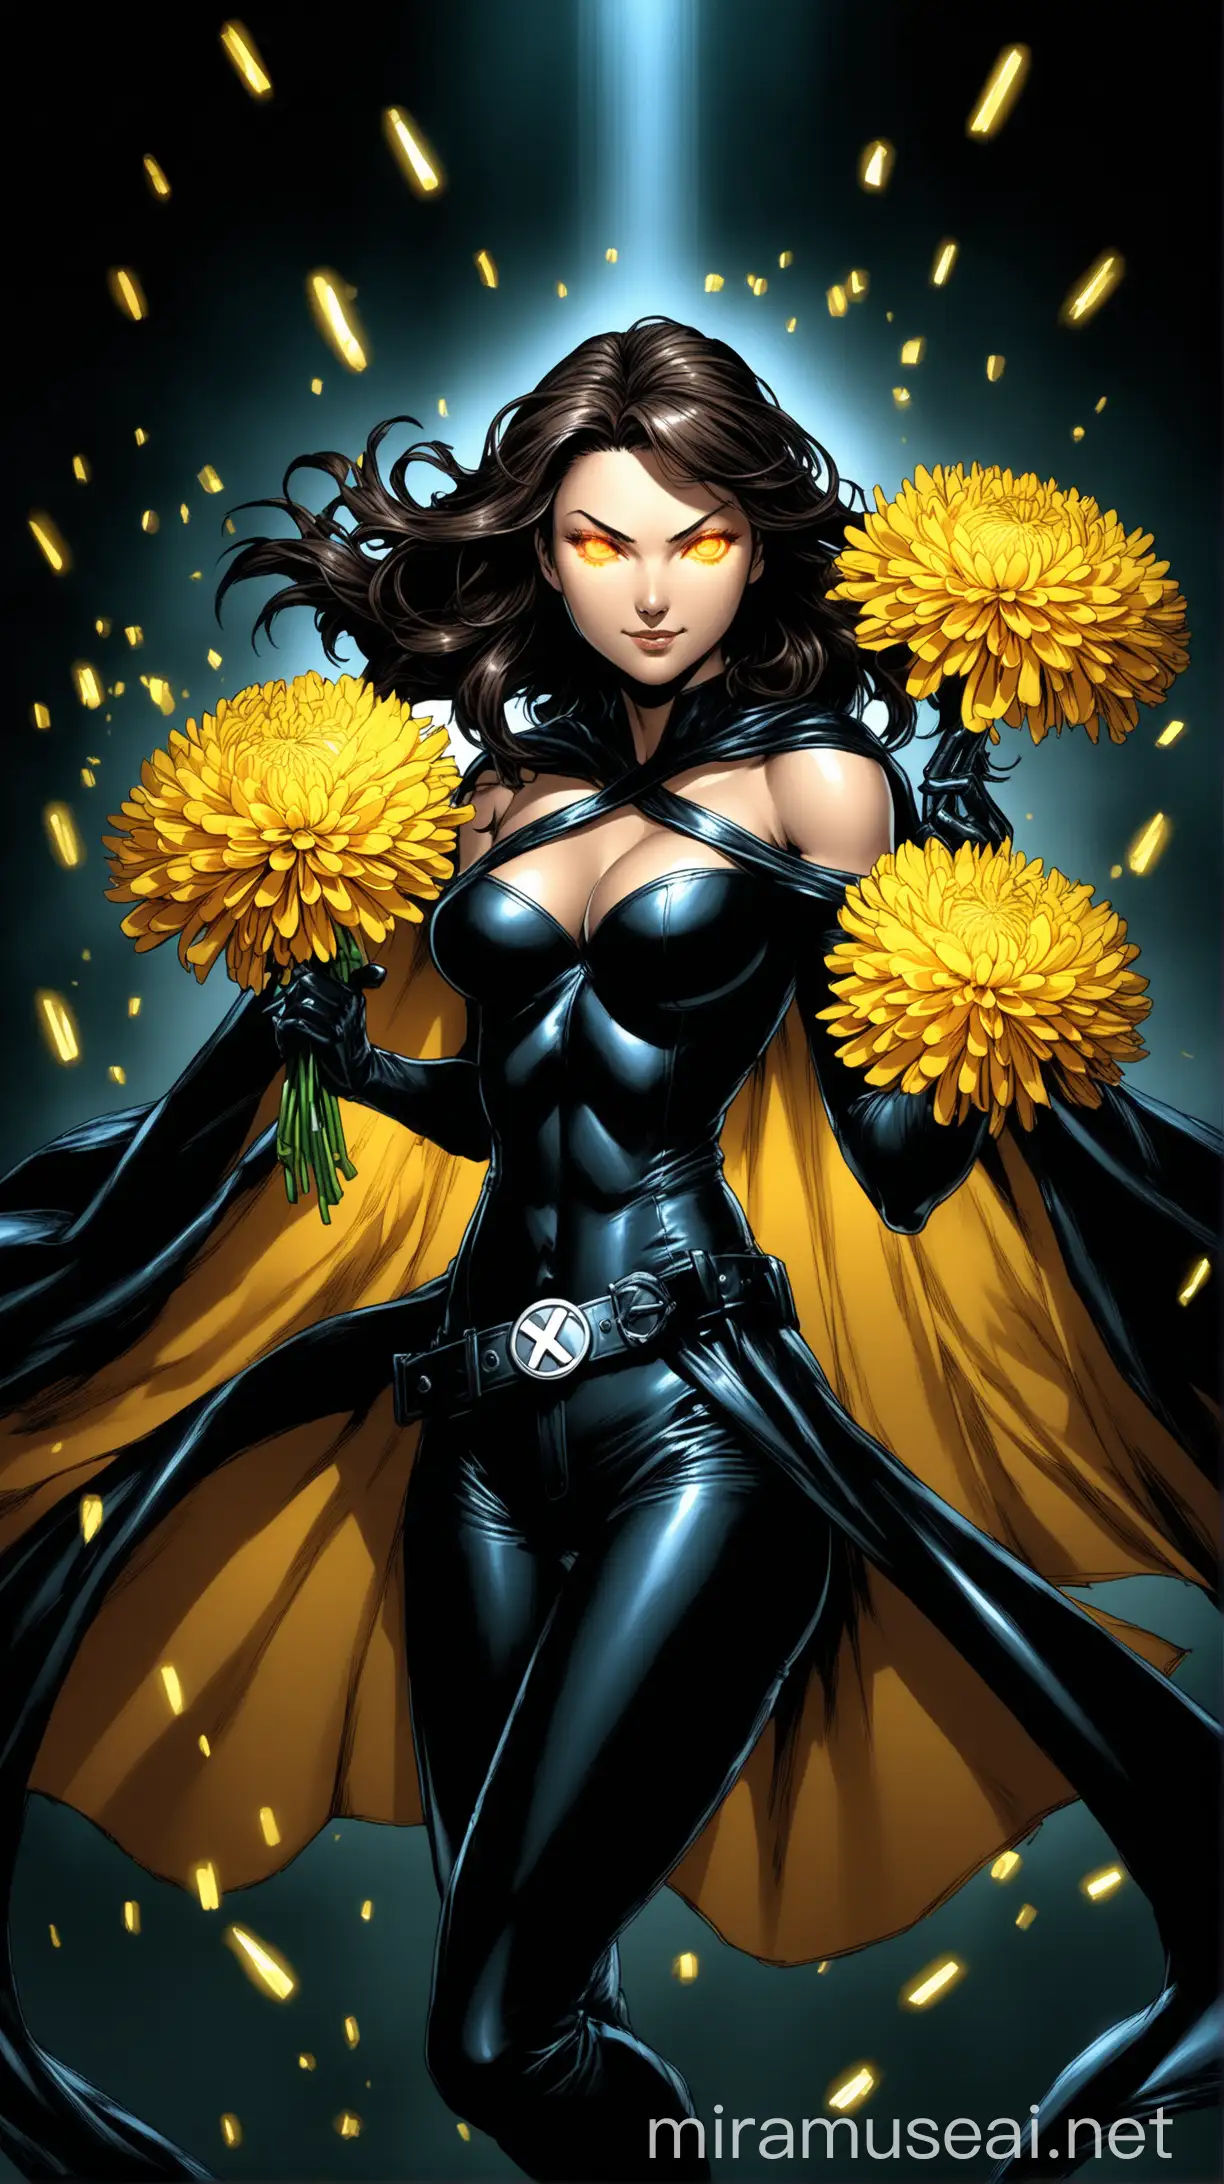 Mysterious Telepathic Heroine with Yellow Chrysanthemums Dynamic Comic Book Cover Art